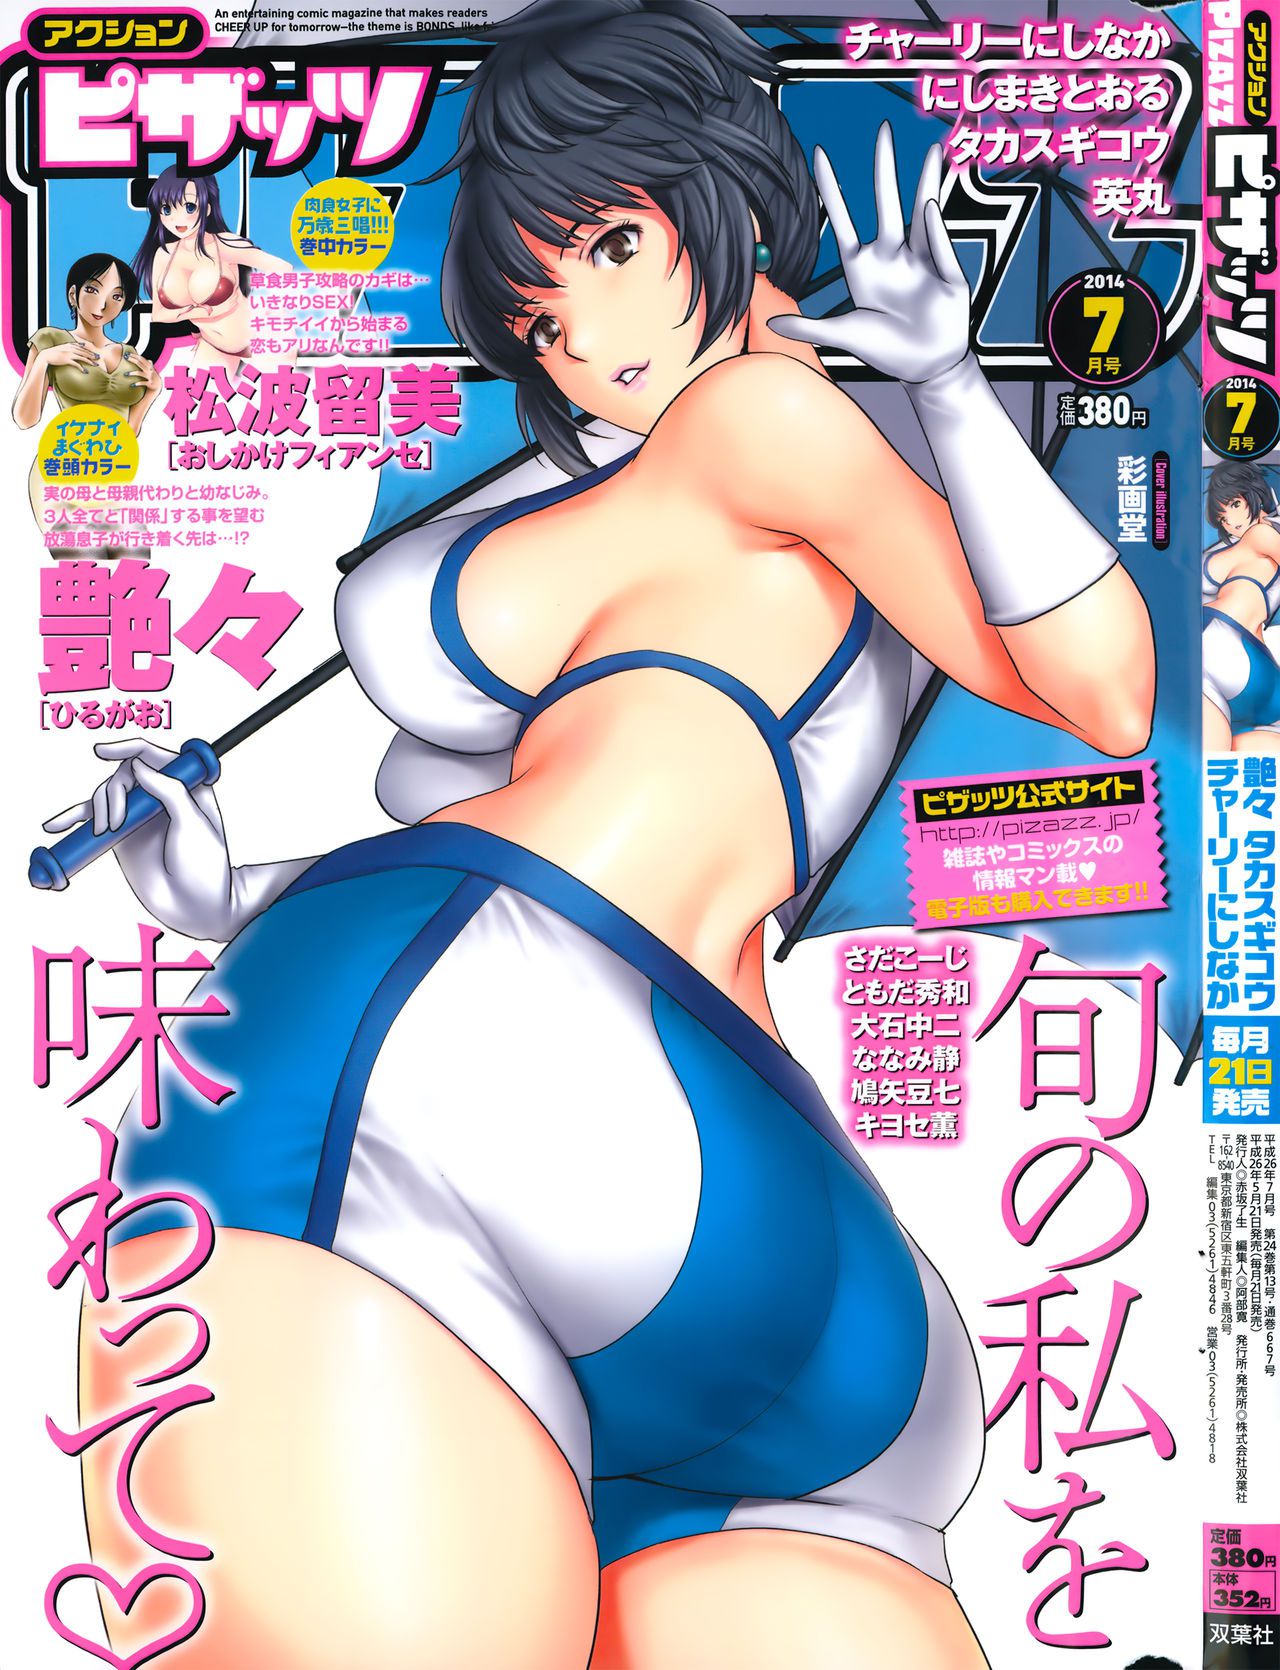 [Saigado] Cover Illustrations [彩画堂] Cover Illustrations 77